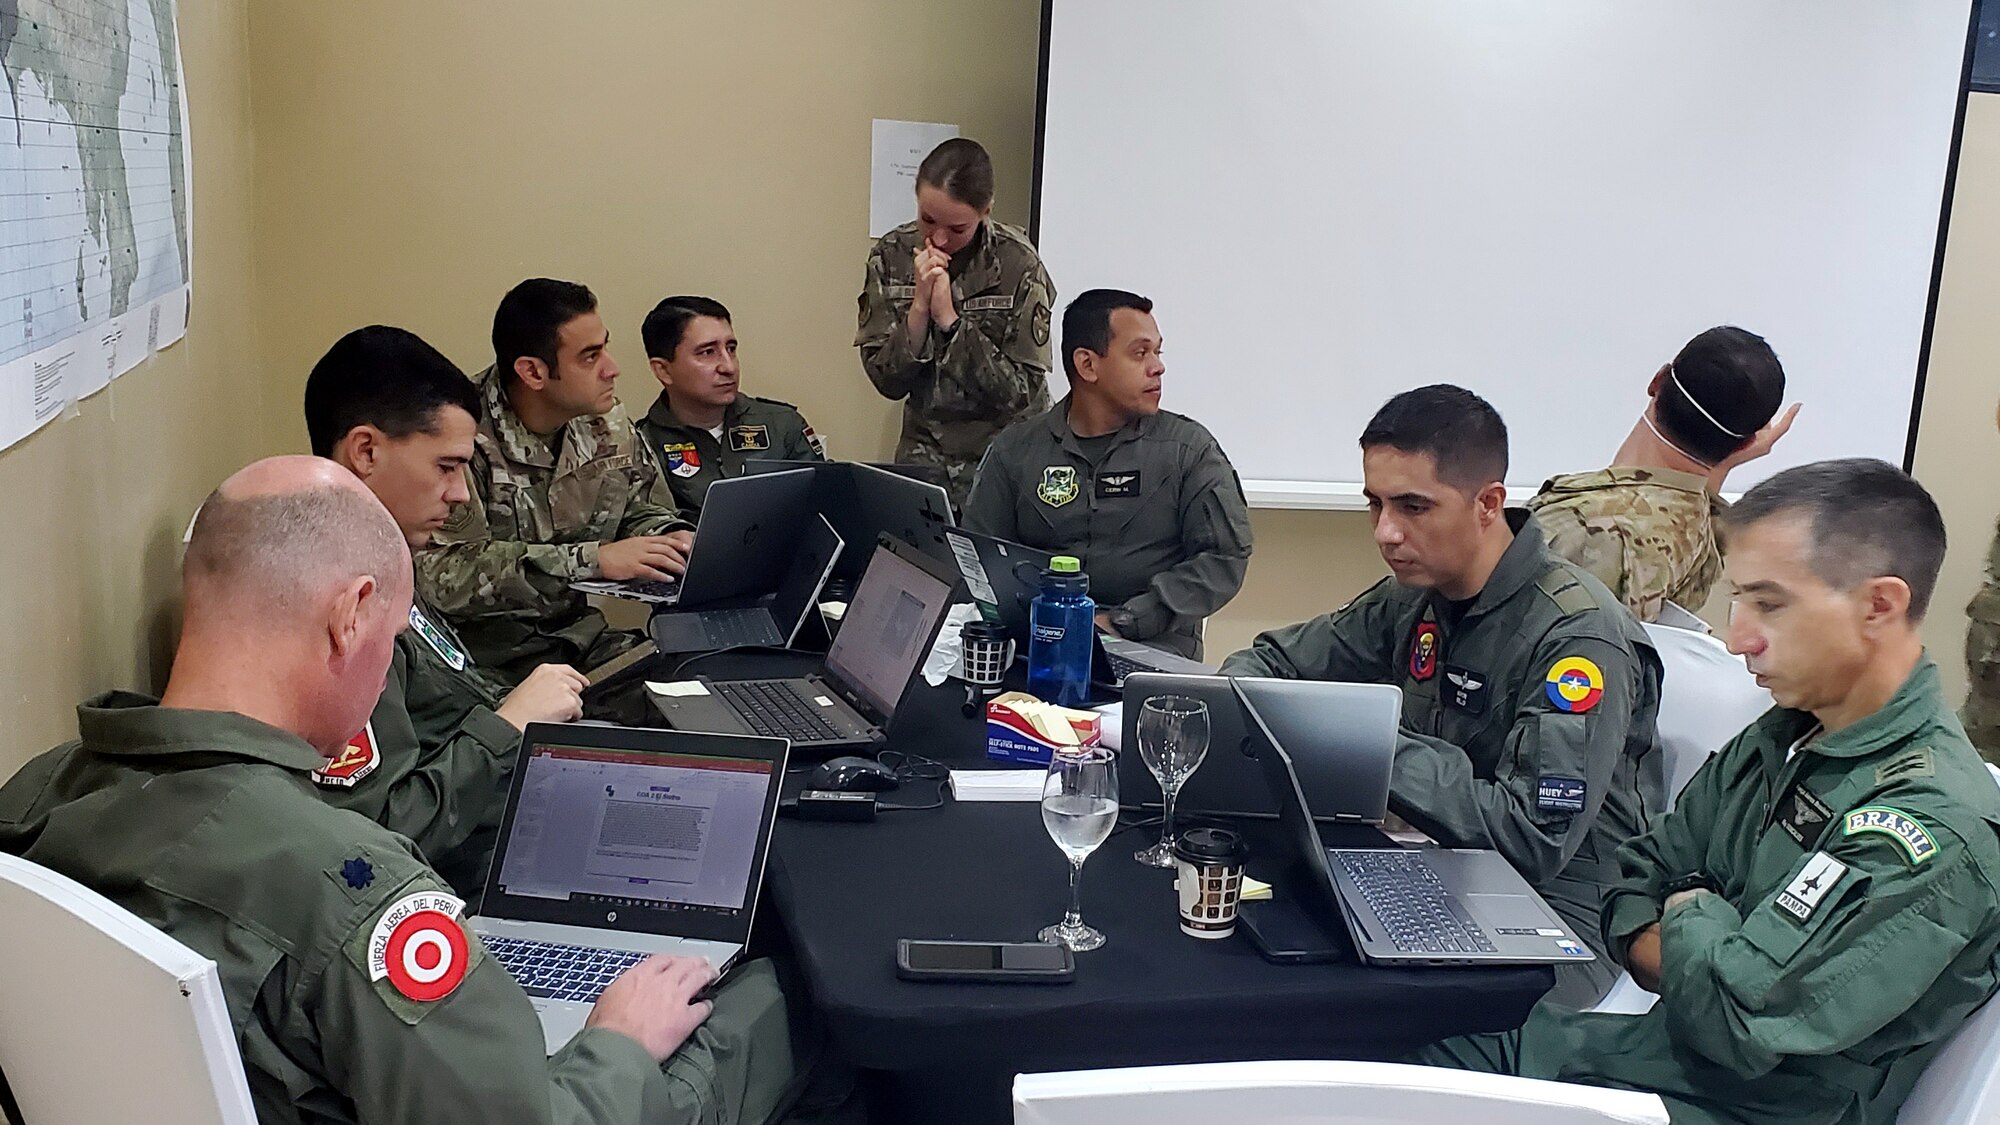 Lt. Col. David Keck and Lt. Col. Charlie Shaw joined air component planners from 10 Caribbean and Latin American countries to aid in coordinating joint operations for the upcoming PANAMAX 2022 exercise.